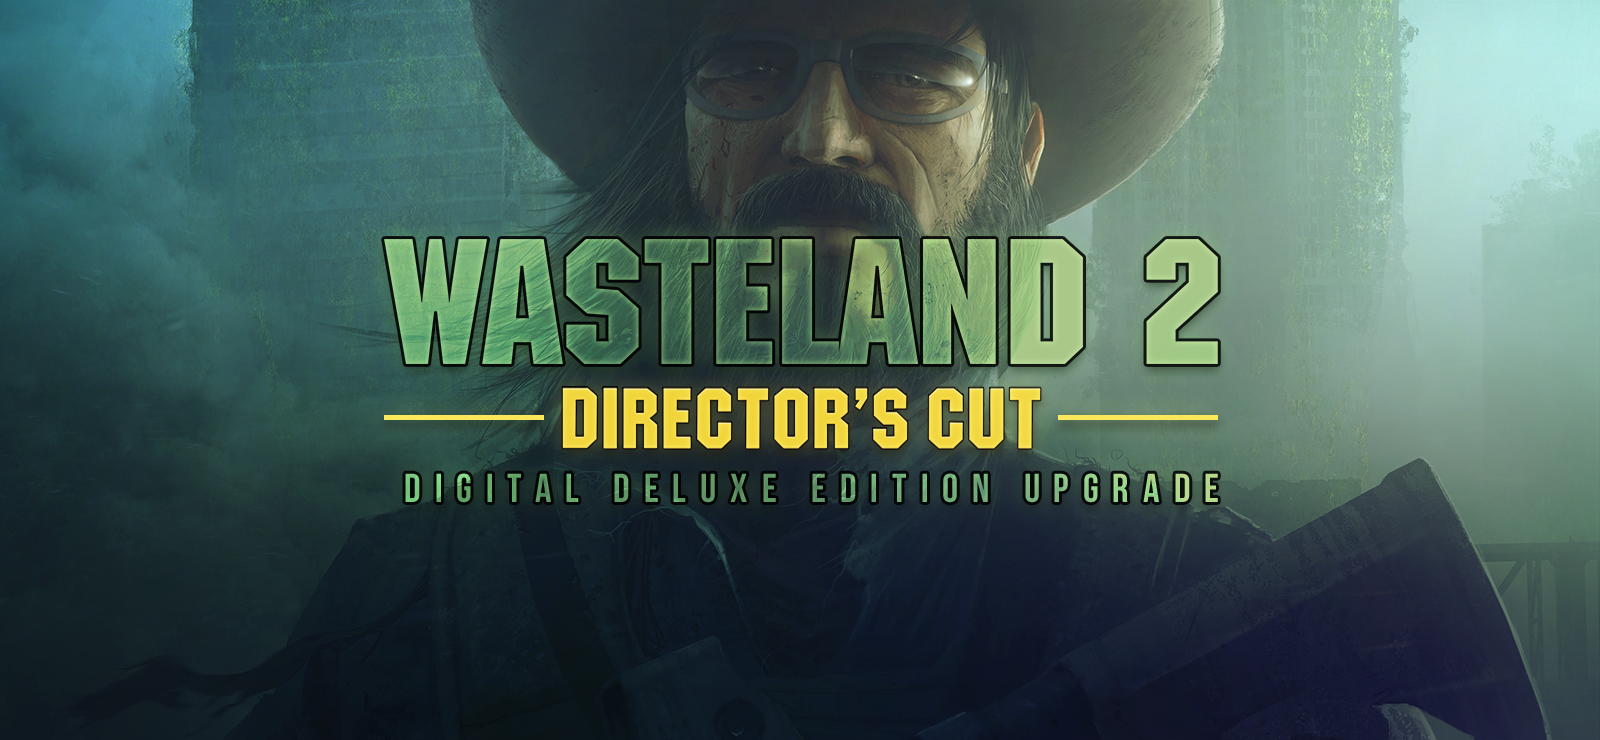 Wasteland 2 Director's Cut Digital Deluxe Edition Upgrade + The Bard's Tale